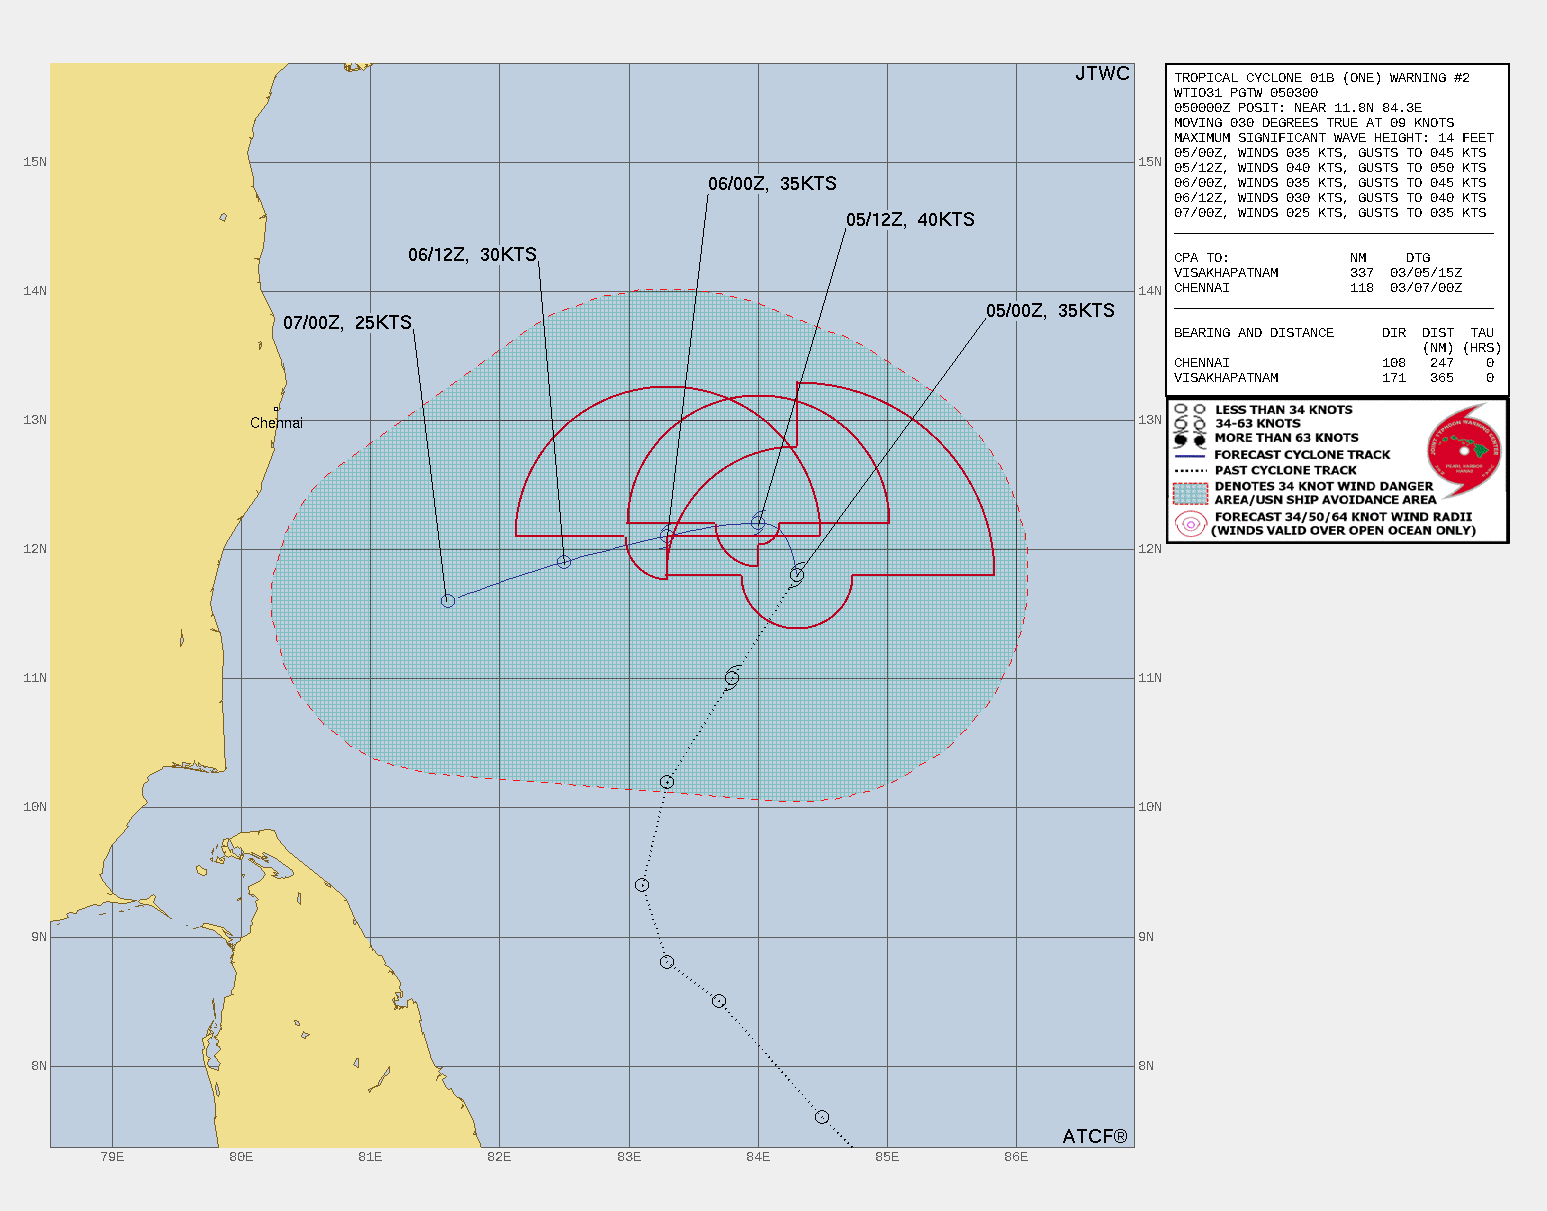 FORECAST REASONING.  SIGNIFICANT FORECAST CHANGES: THERE ARE NO SIGNIFICANT CHANGES TO THE FORECAST FROM THE PREVIOUS WARNING.  FORECAST DISCUSSION: TC 01B IS CURRENTLY TRACKING NORTHEAST UNDER THE STEERING INFLUENCE OF A SUBTROPICAL RIDGE (STR), UNLIKE PREVIOUSLY FORECAST THE SYSTEM HAS NOT YET TURNED TOWARD THE MAINLAND OF SOUTHEASTERN INDIA. HOWEVER, BY 12H, AS THE STR CONTINUES TO BUILD IN FROM THE NORTHEAST, THE SYSTEM WILL BE FORCED TO TRACK WEST- SOUTHWESTWARD. TC 01B IS FORECAST TO REACH A PEAK INTENSITY OF 40  KNOTS WHILE STILL IN A MARGINAL ENVIRONMENT CHARACTERIZED BY WARM  (27-28 C) SEA SURFACE TEMPERATURES (SST), LOW (5-10 KTS) VERTICAL  WINDS SHEAR (VWS) AND GOOD POLEWARD AND WESTWARD OUTFLOW, OFF SET BY  WEAK DRY AIR ENTRAINMENT. BETWEEN 12H AND 36H, SIGNIFICANT DRY AIR  ENTRAINMENT, INCREASING VWS AND LAND INTERACTION WILL STEADILY  WEAKEN TC 01B. BY 48H, THE INTENSITY IS FORECAST TO FALL BELOW 25  KNOTS AS ITS MID AND UPPER LEVELS BECOME FULLY ENTRAINED BY DRY AIR  AFTER WHICH FULL DISSIPATION IS EXPECTED.